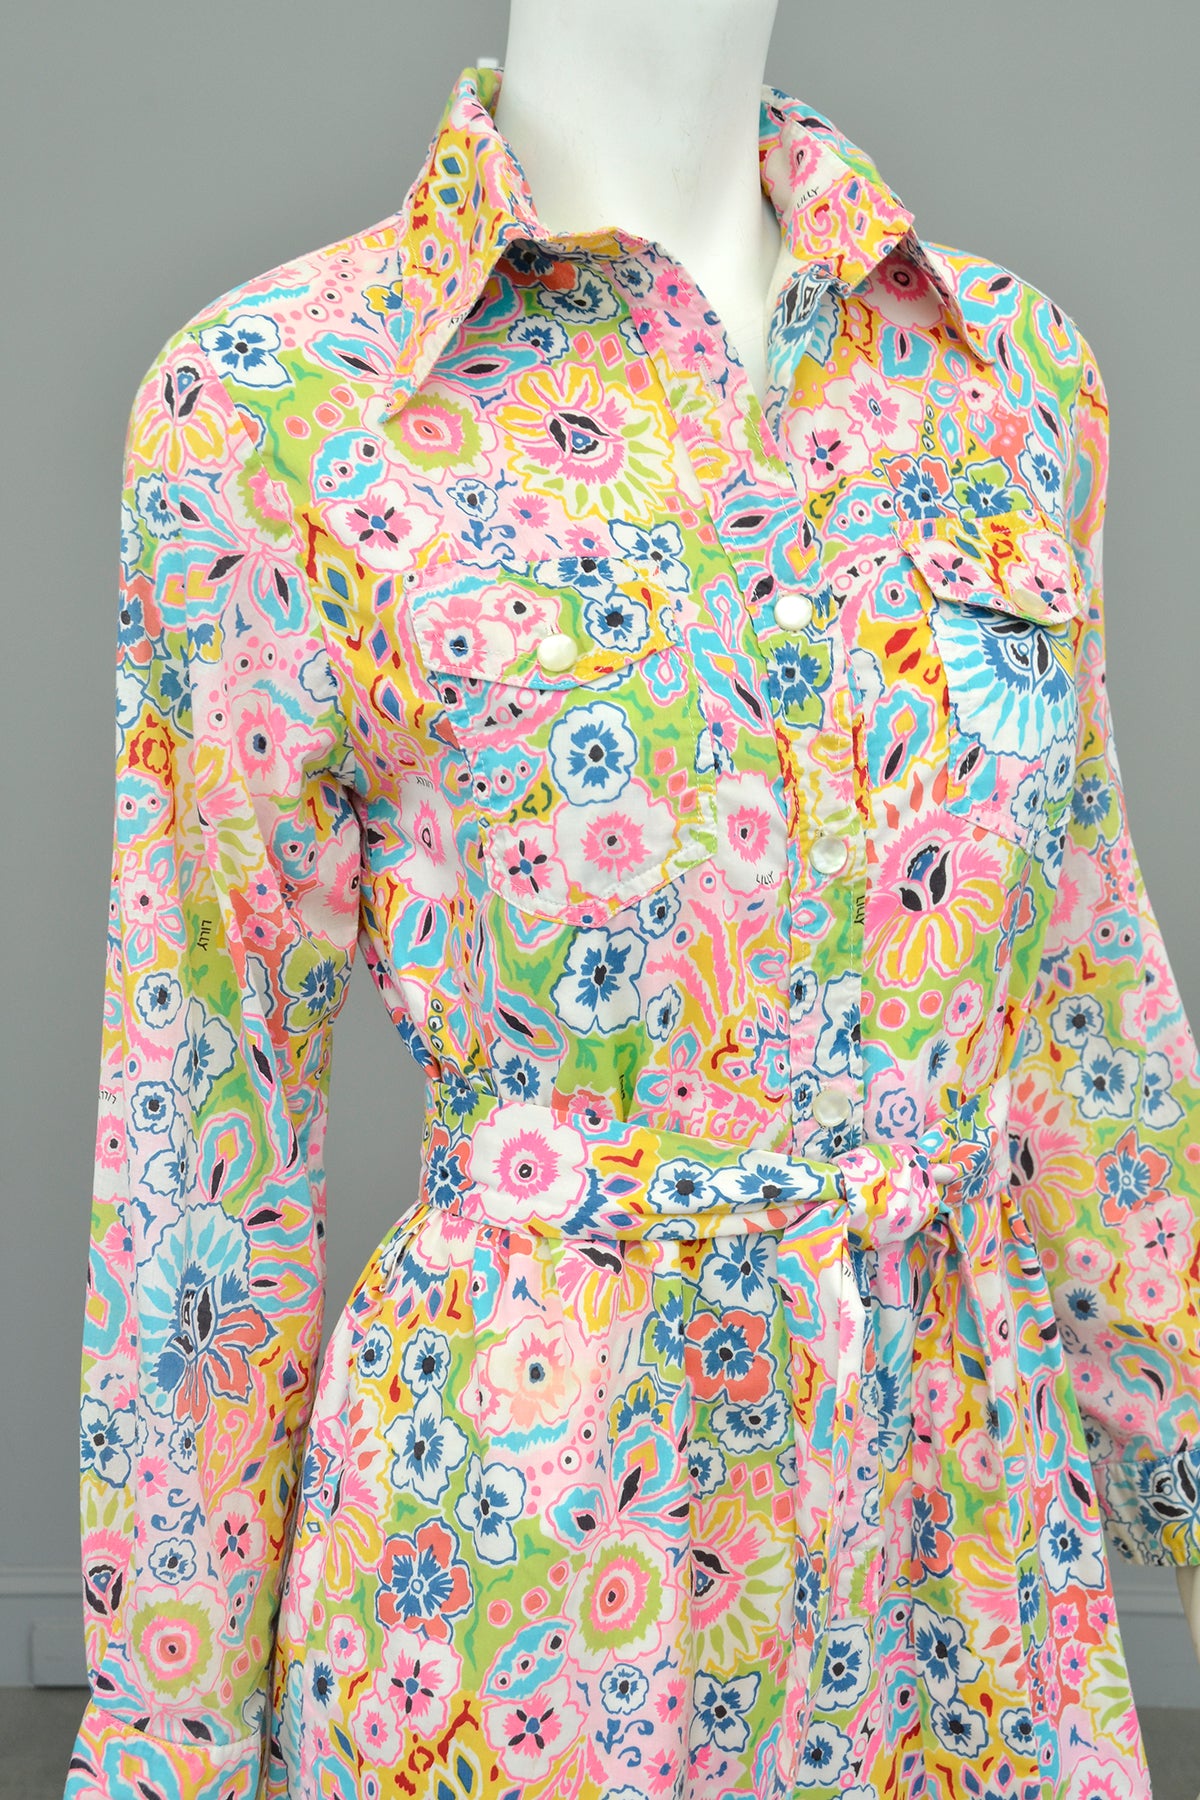 1960s Vintage Lilly Pulitzer Floral Print Button Down Dress | The Lilly Dress